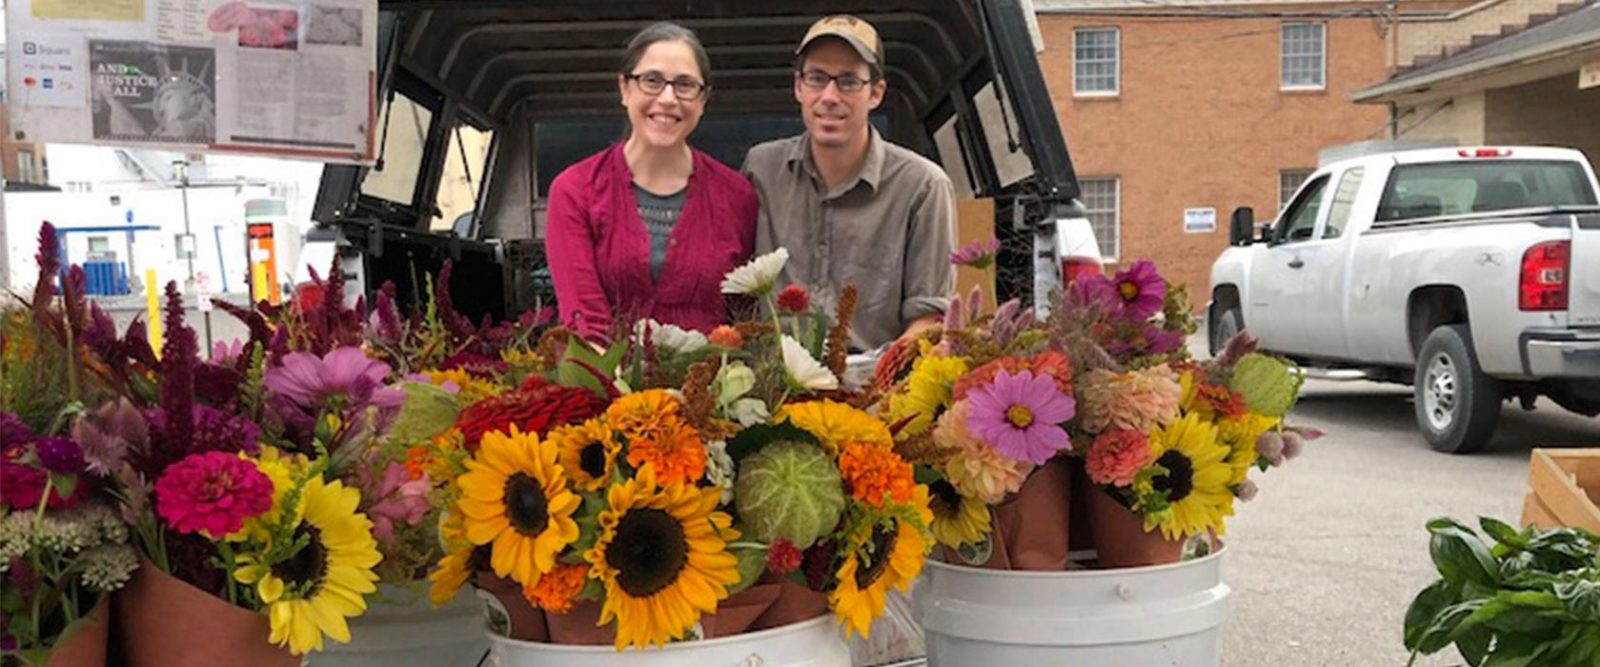 Farm couple at their flower display in the Lancaster Farmer’s Market